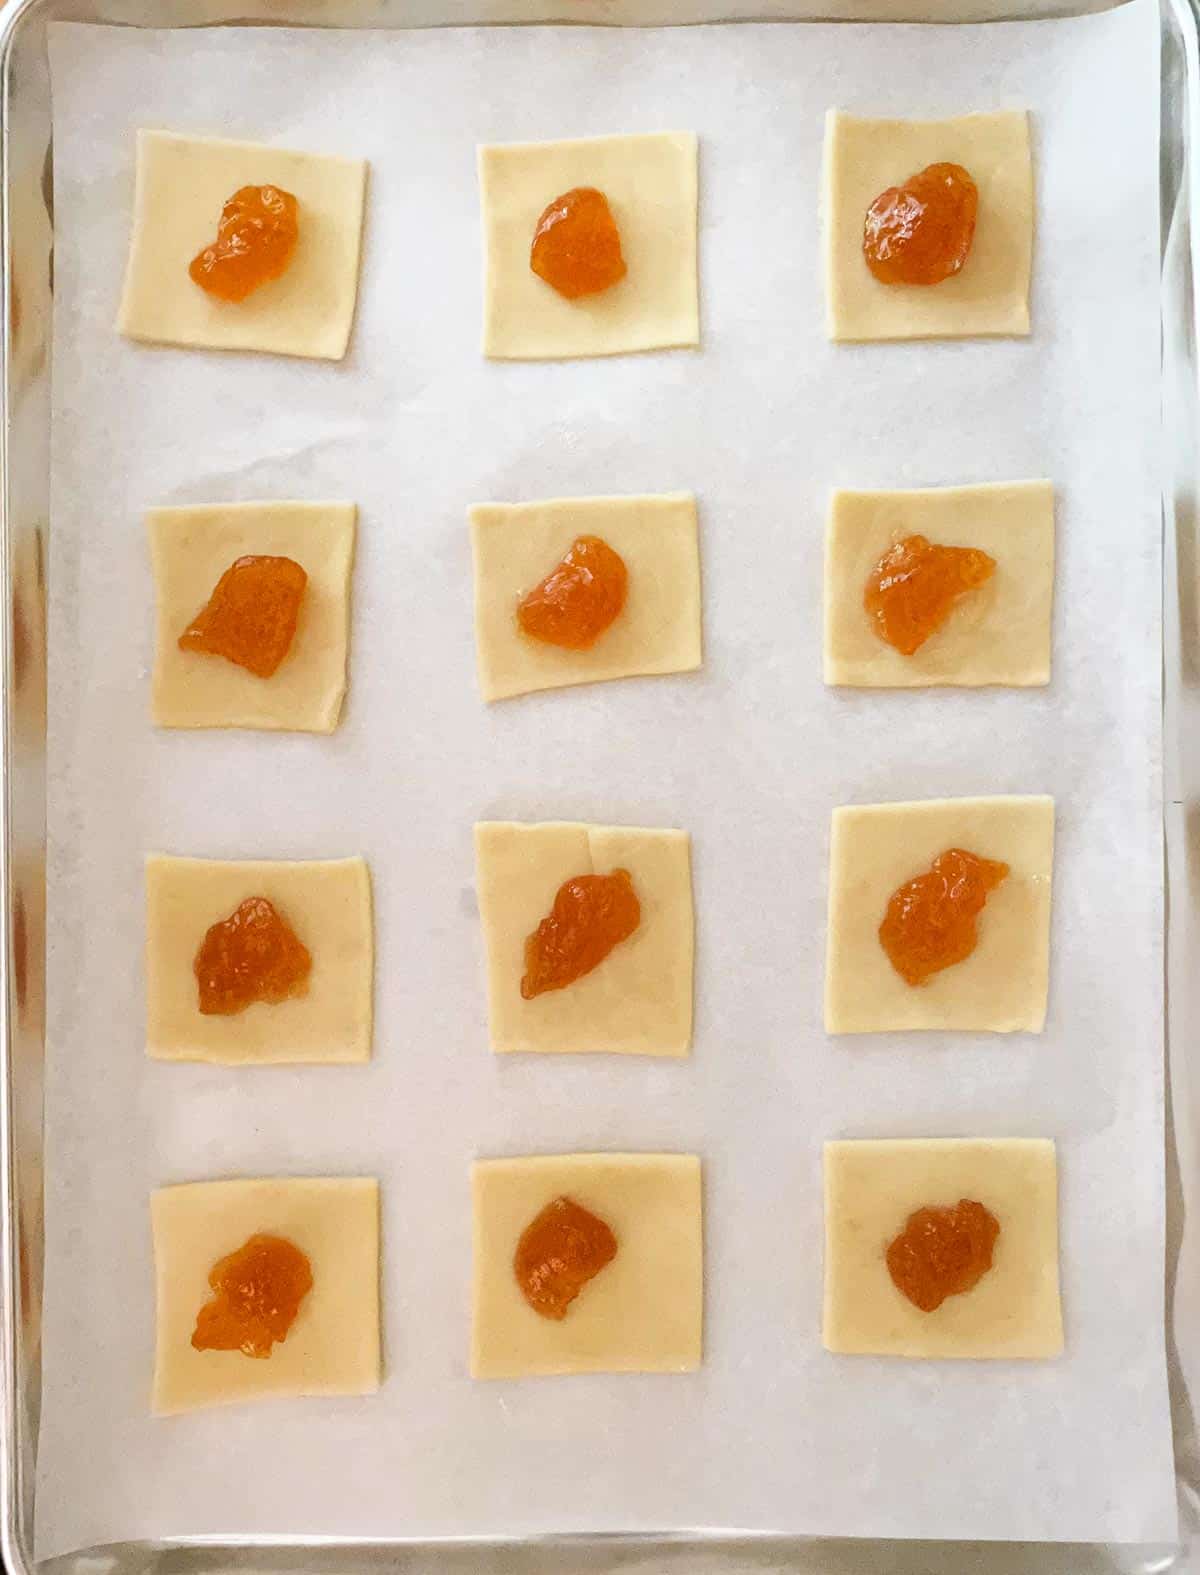 Rolled out cookie dough and cut into squares with a teaspoon of peach preserves in the middle.